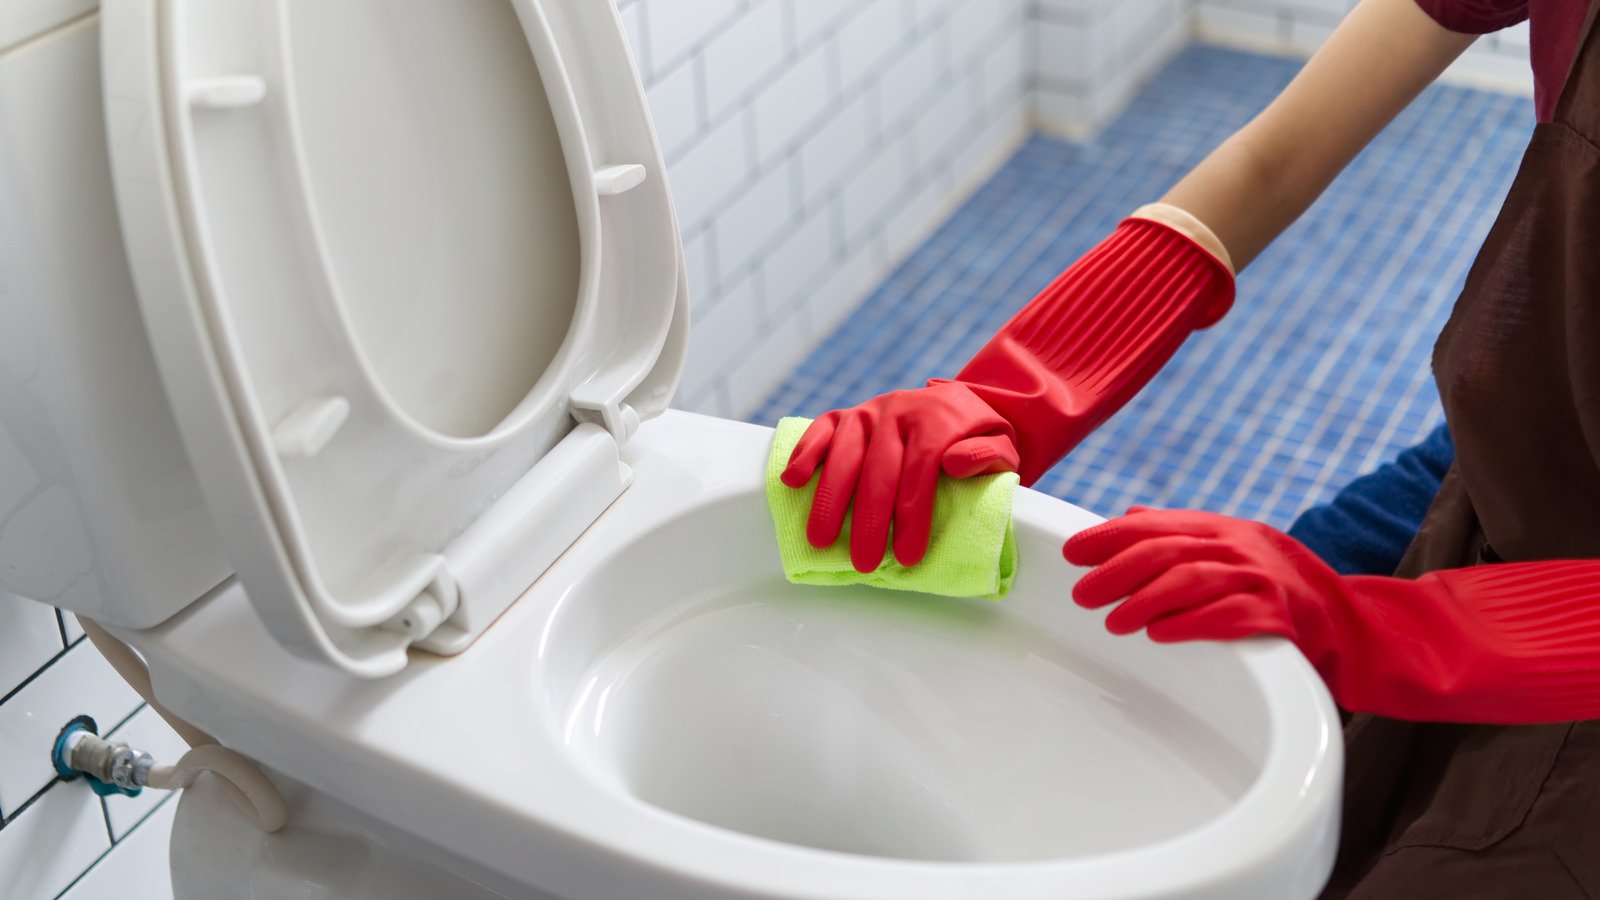 How to Clean a Toilet the Right Way (Yes, There's a Right Way)